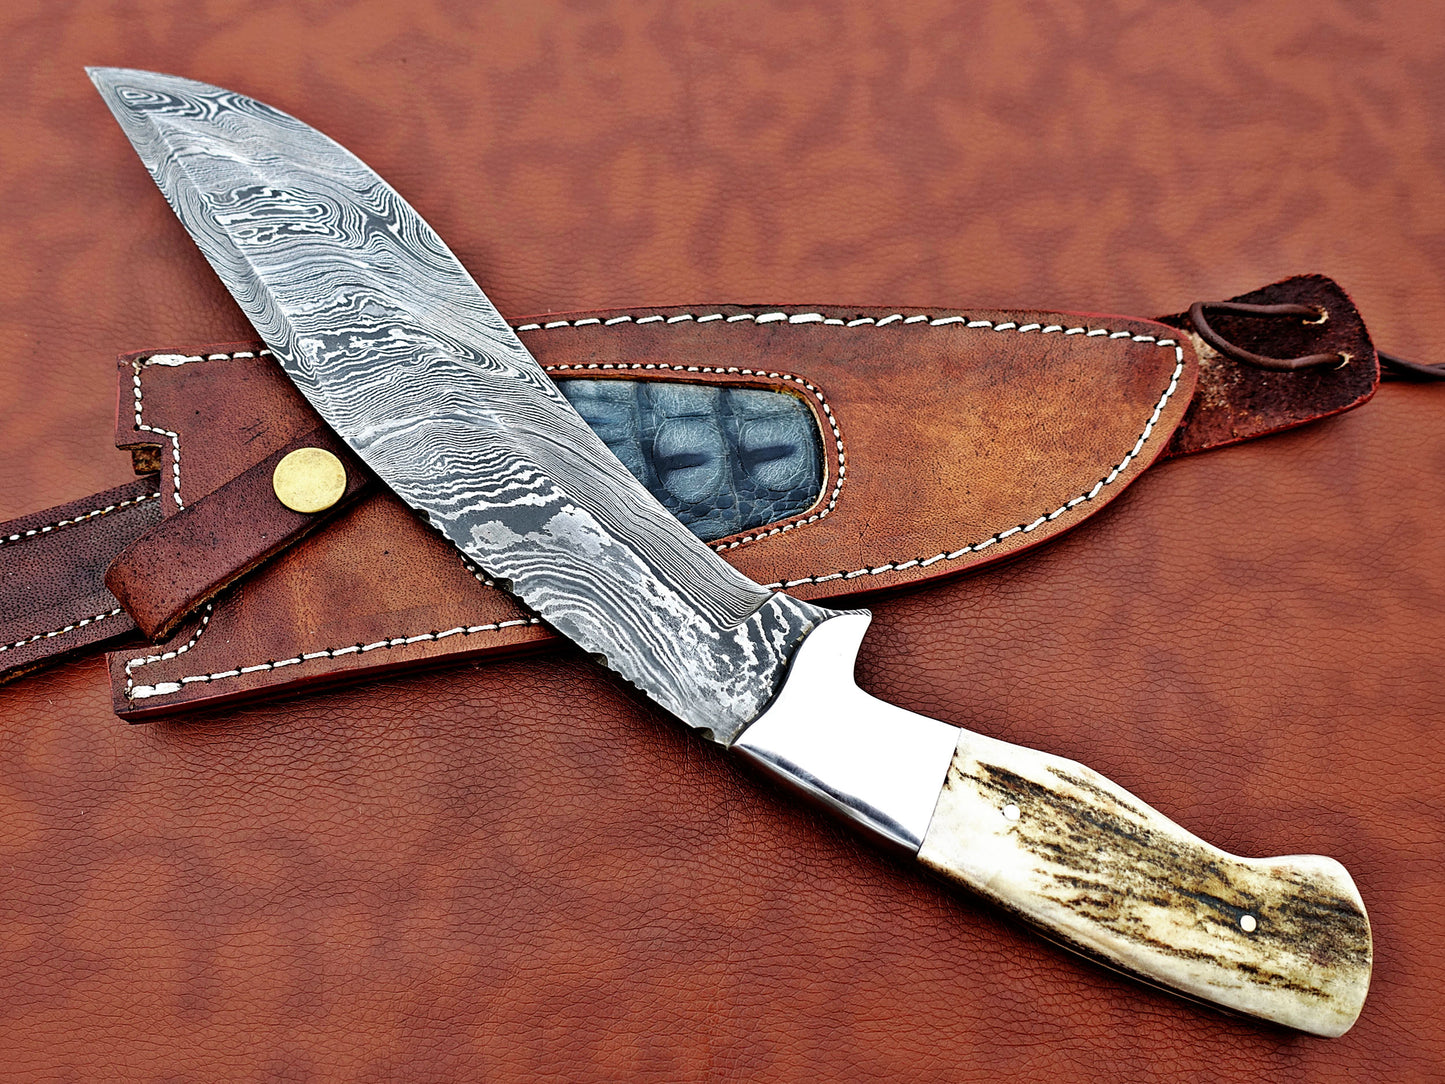 Damascus Steel Kukri Knife 14 Inches custom made Hand Forged With 9" long blade, Stag Antler scale, Cow Leather Sheath